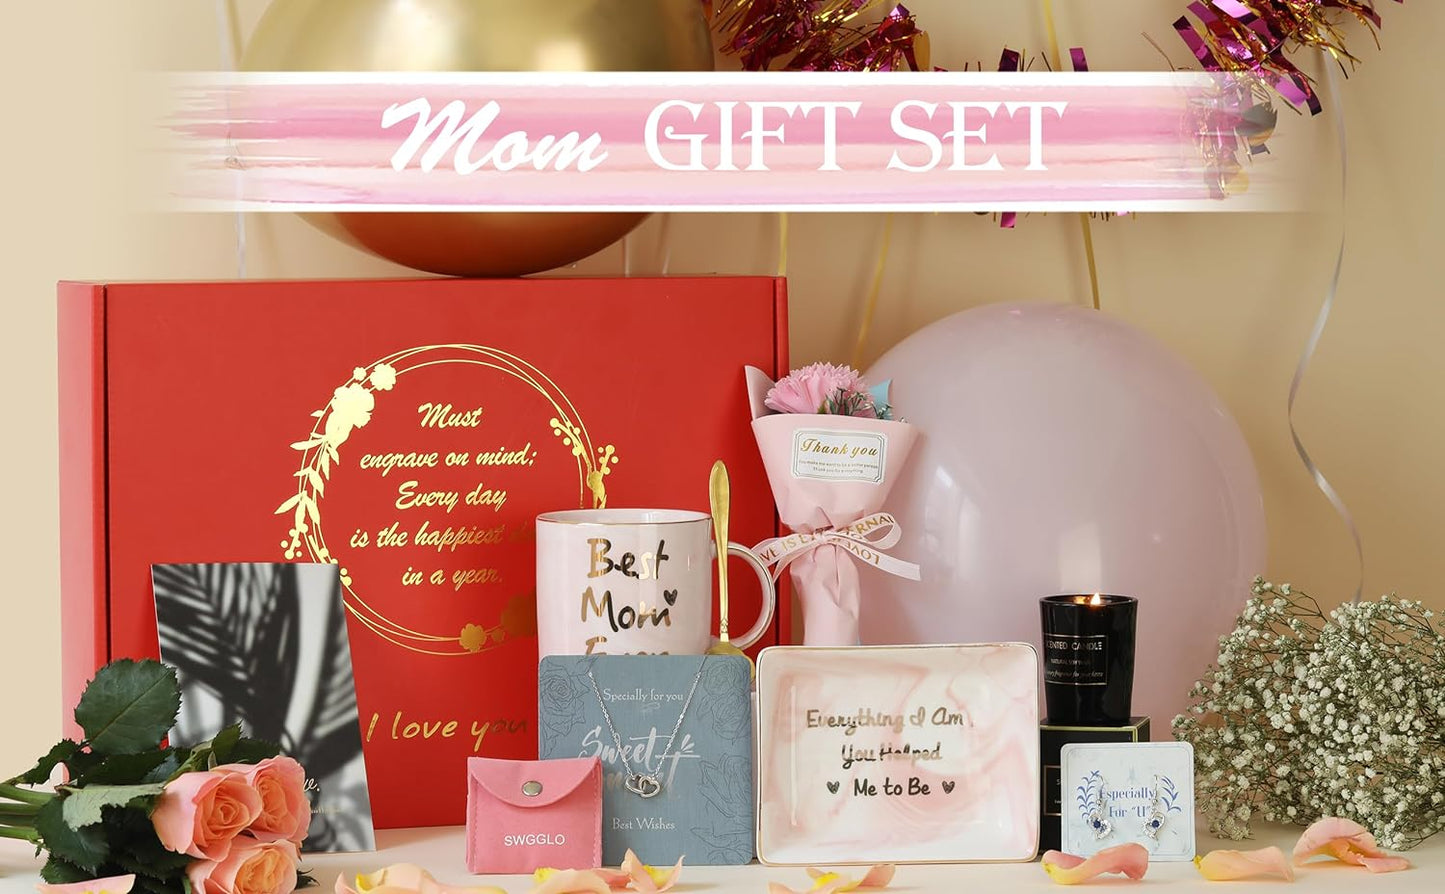 Gifts for Mom - Birthday Gifts for Mom - Mom Gifts - Christmas Gifts for Mom - Mother'S Day Gifts for Mom - Bset Gift Basket for Mom